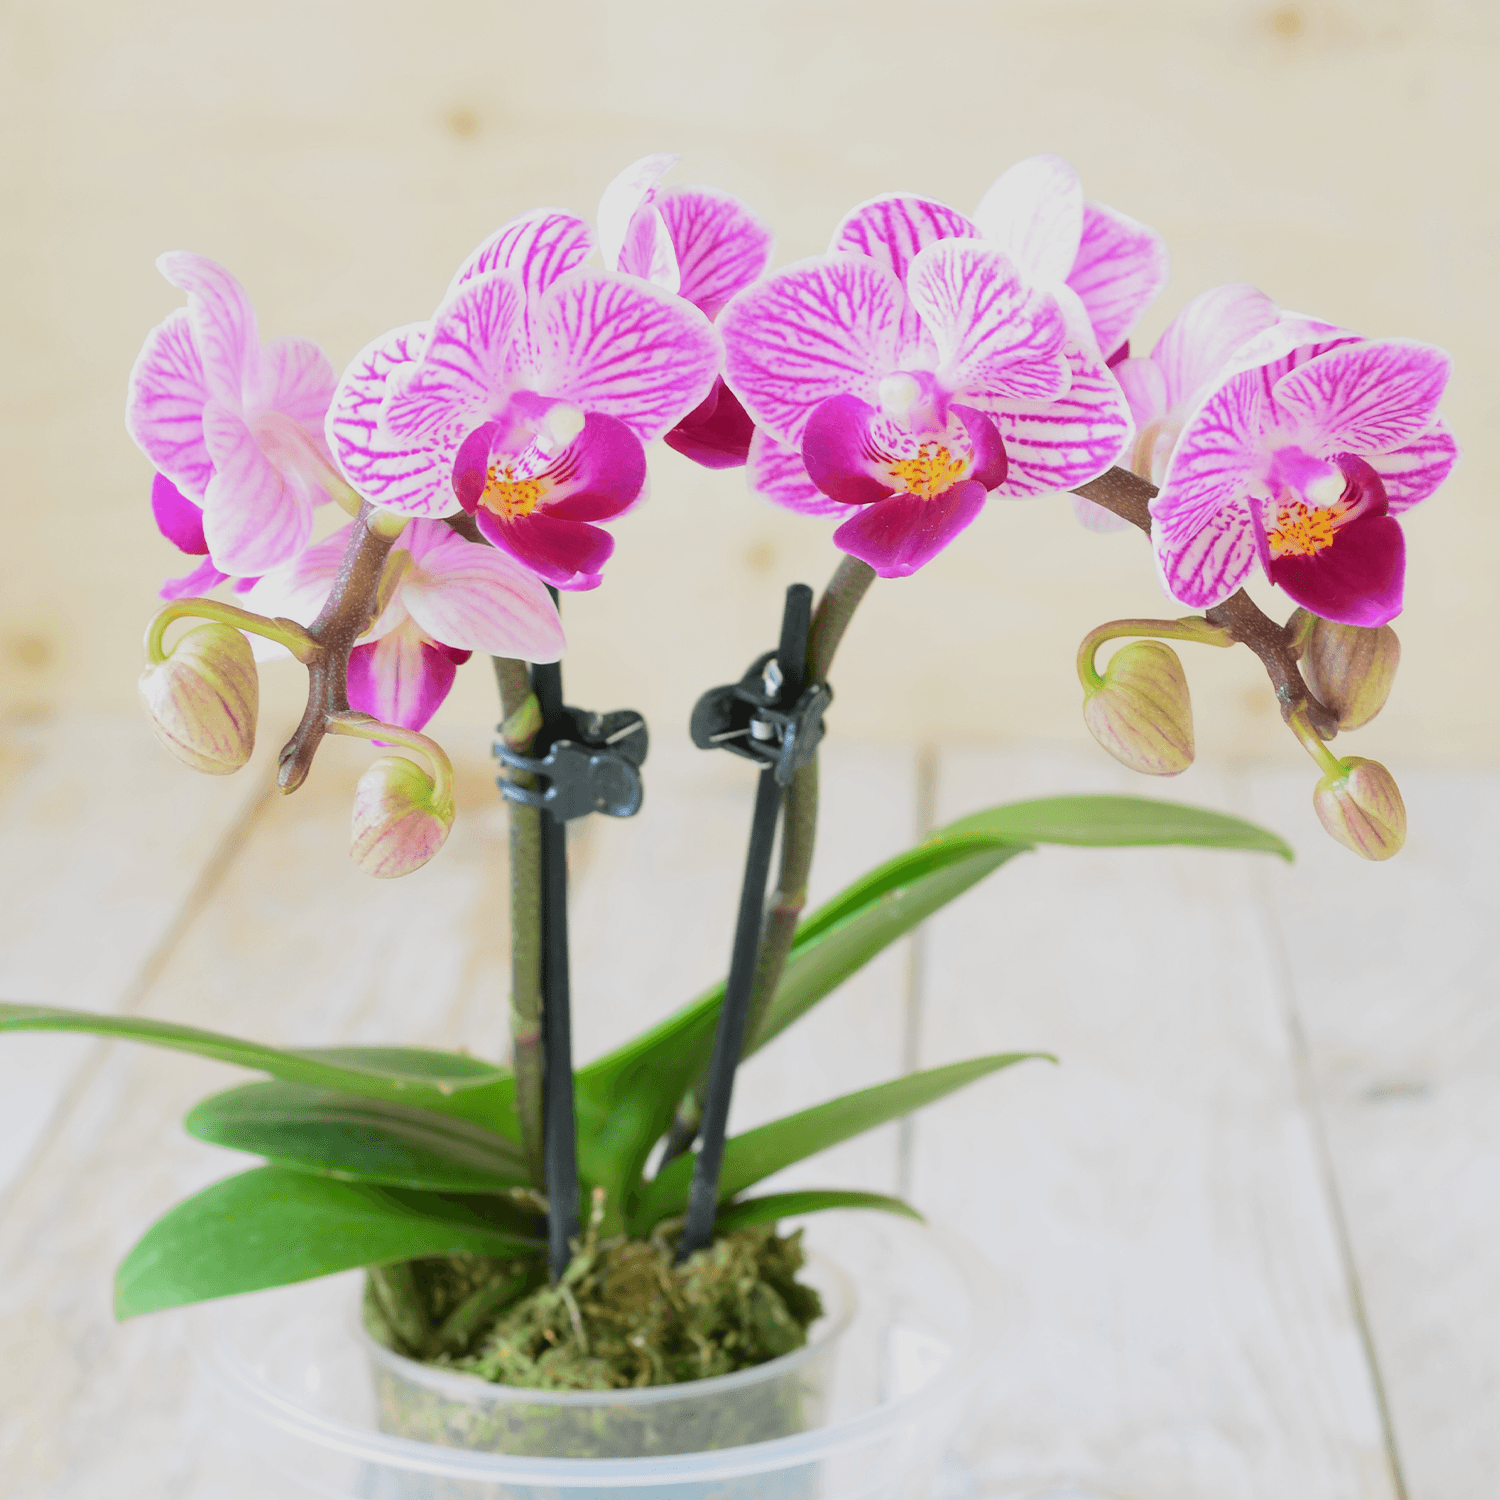 The Most Beautiful Varieties of Orchids to Grow Indoors